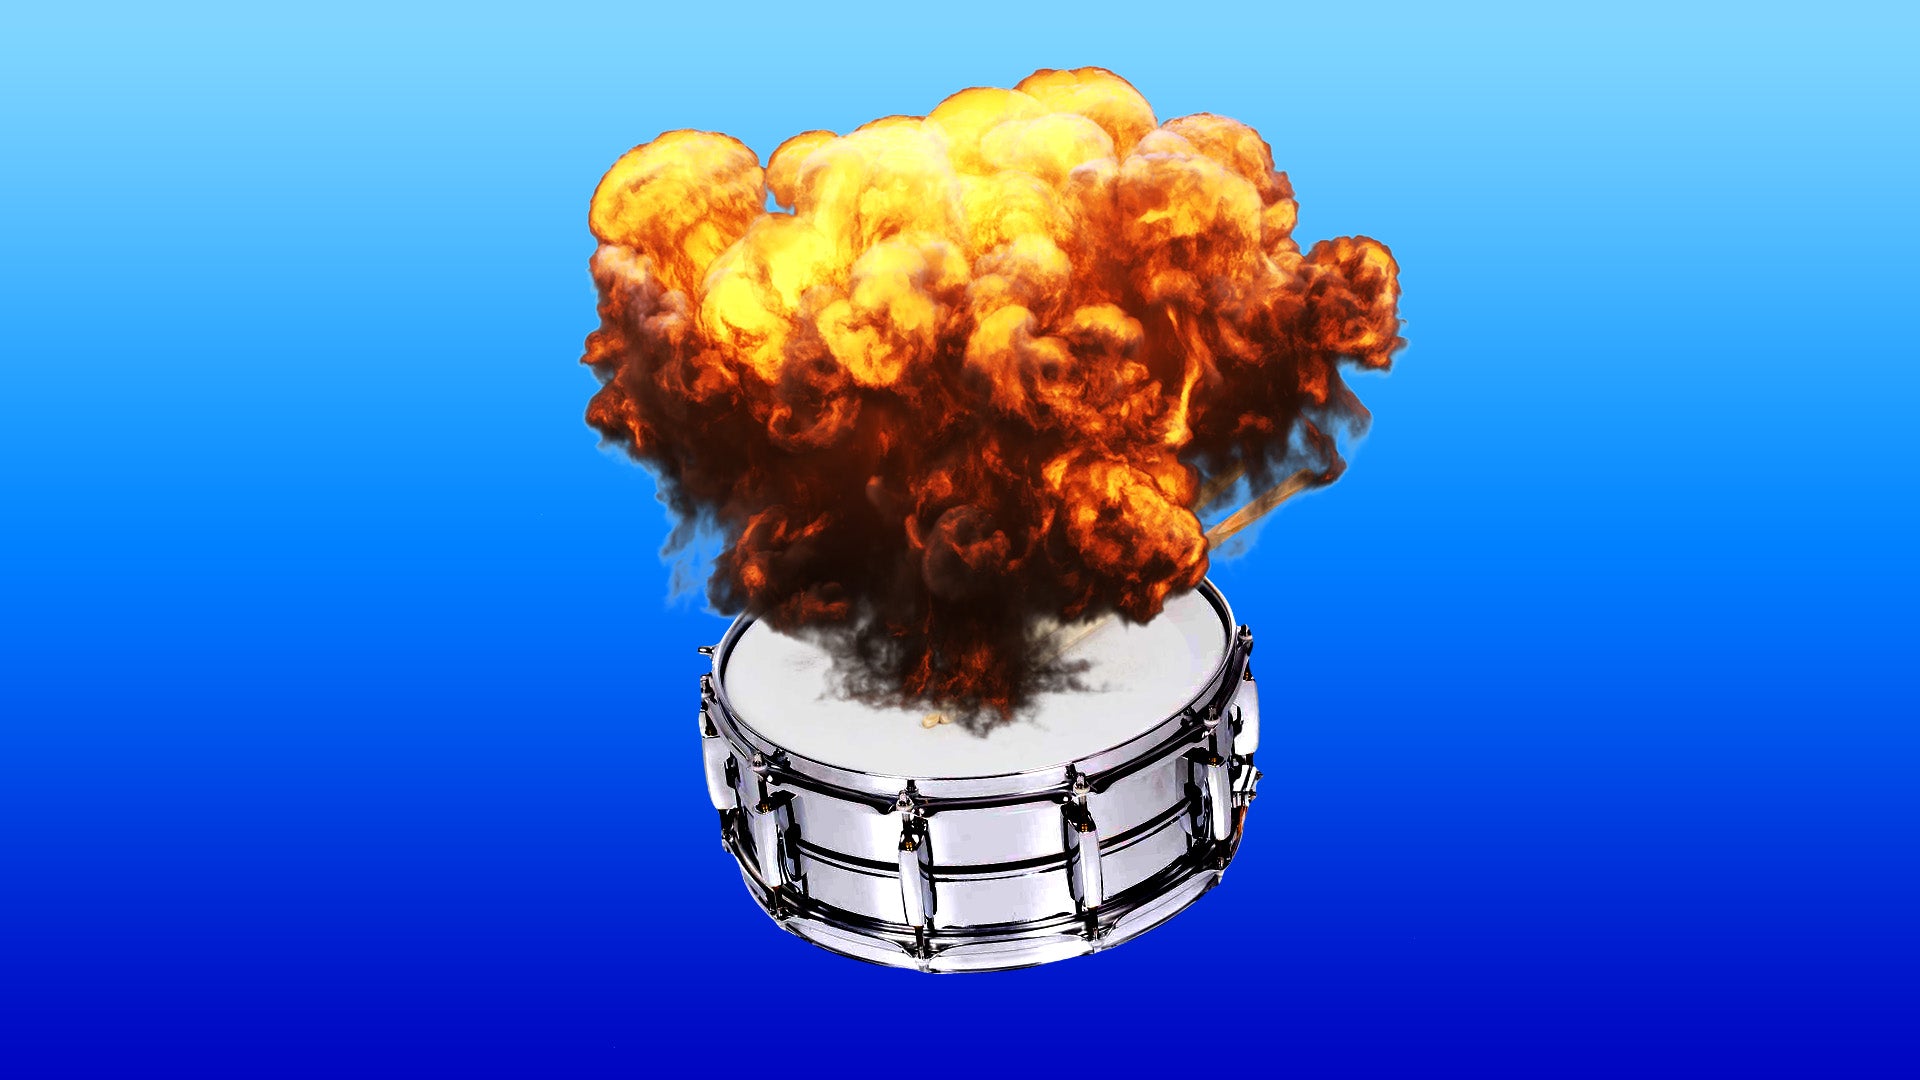 How to achieve a booming snare drum